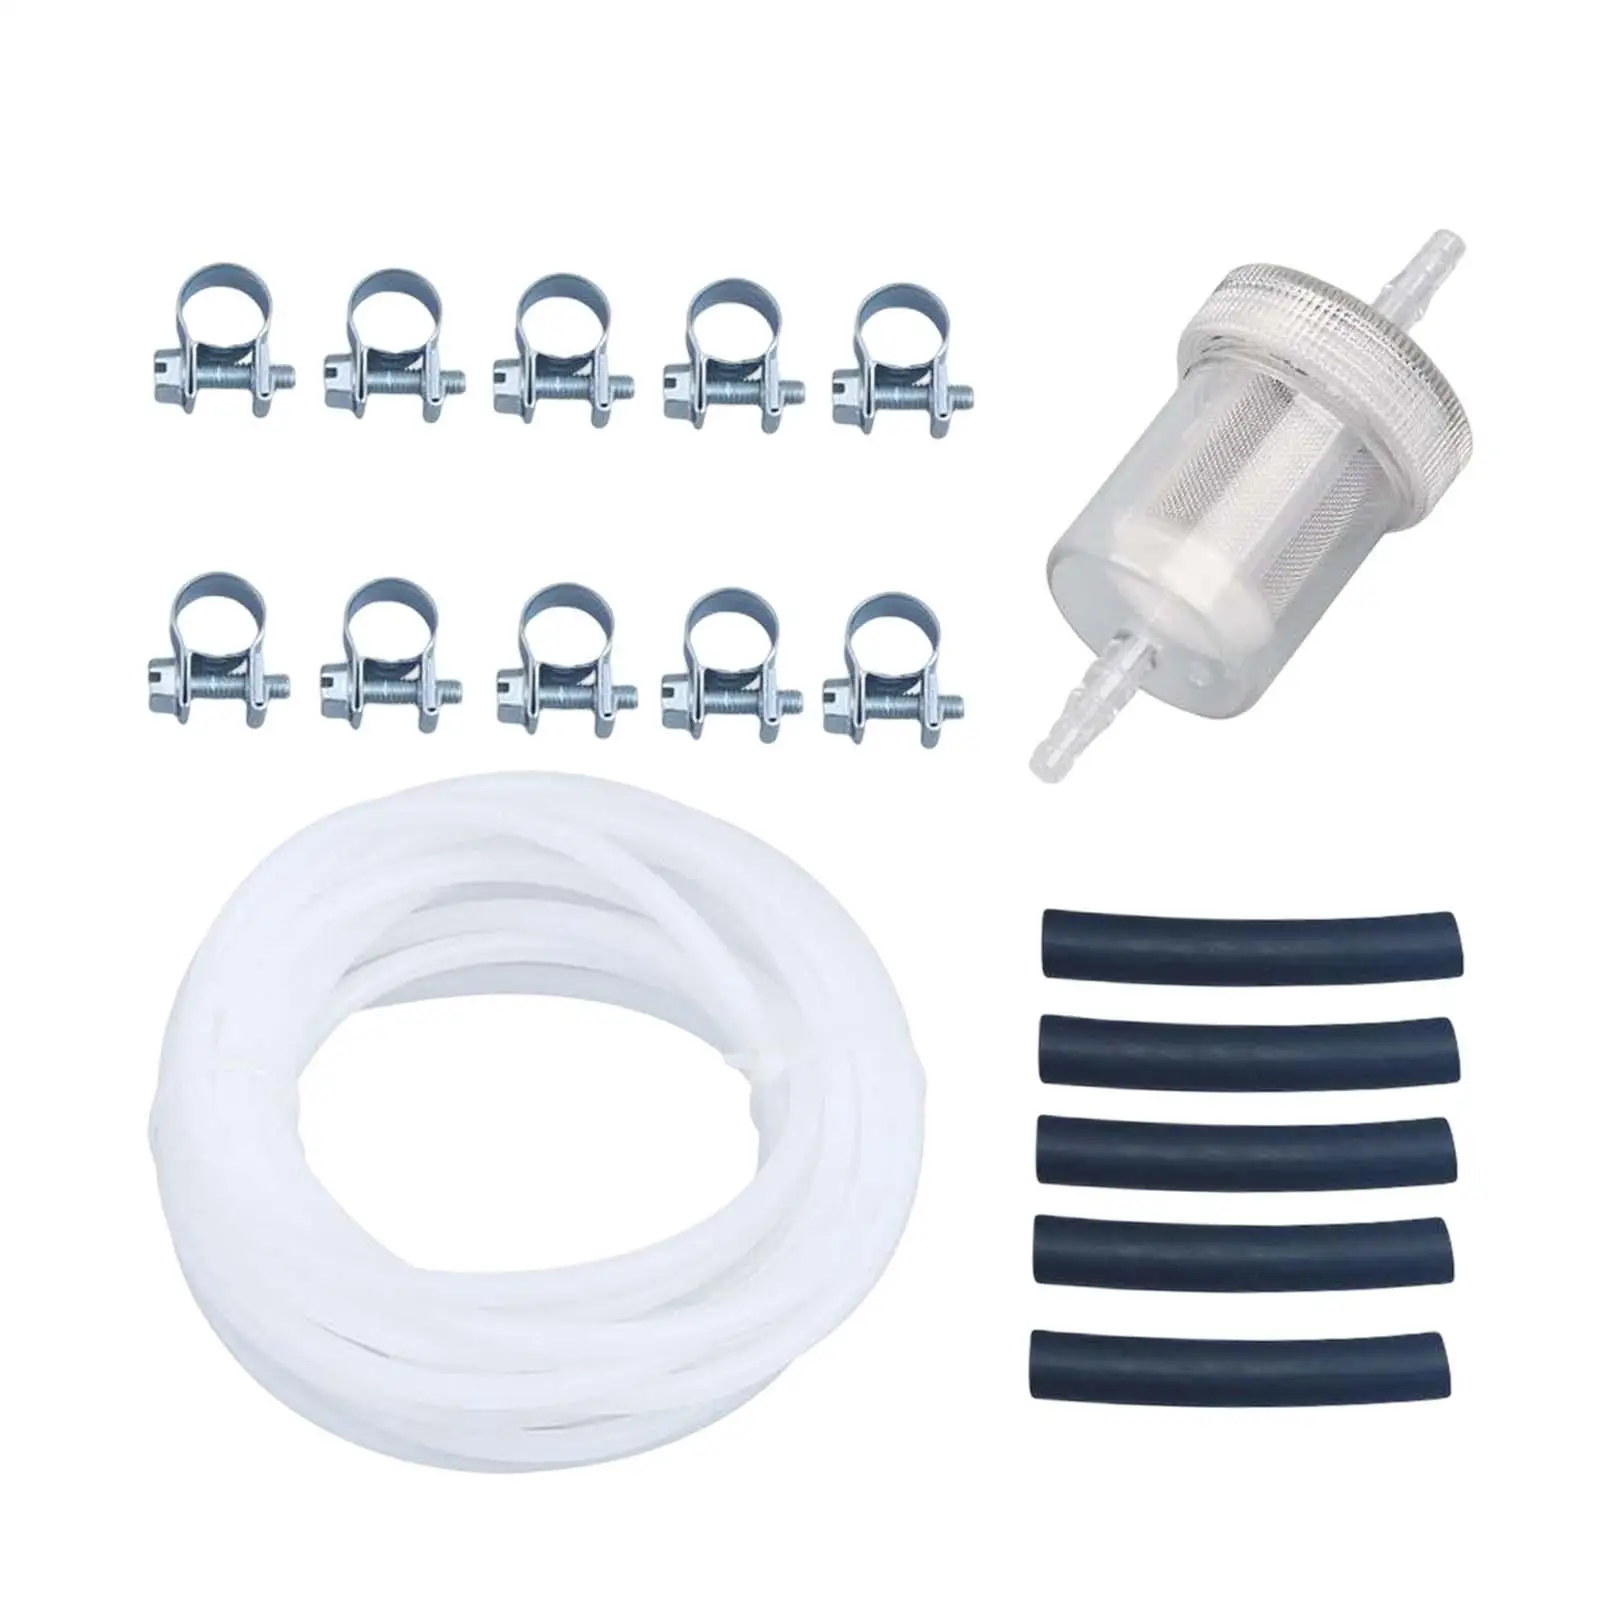 Fuel Pipe Line Hose Clip Kit for Heater Tank Professional